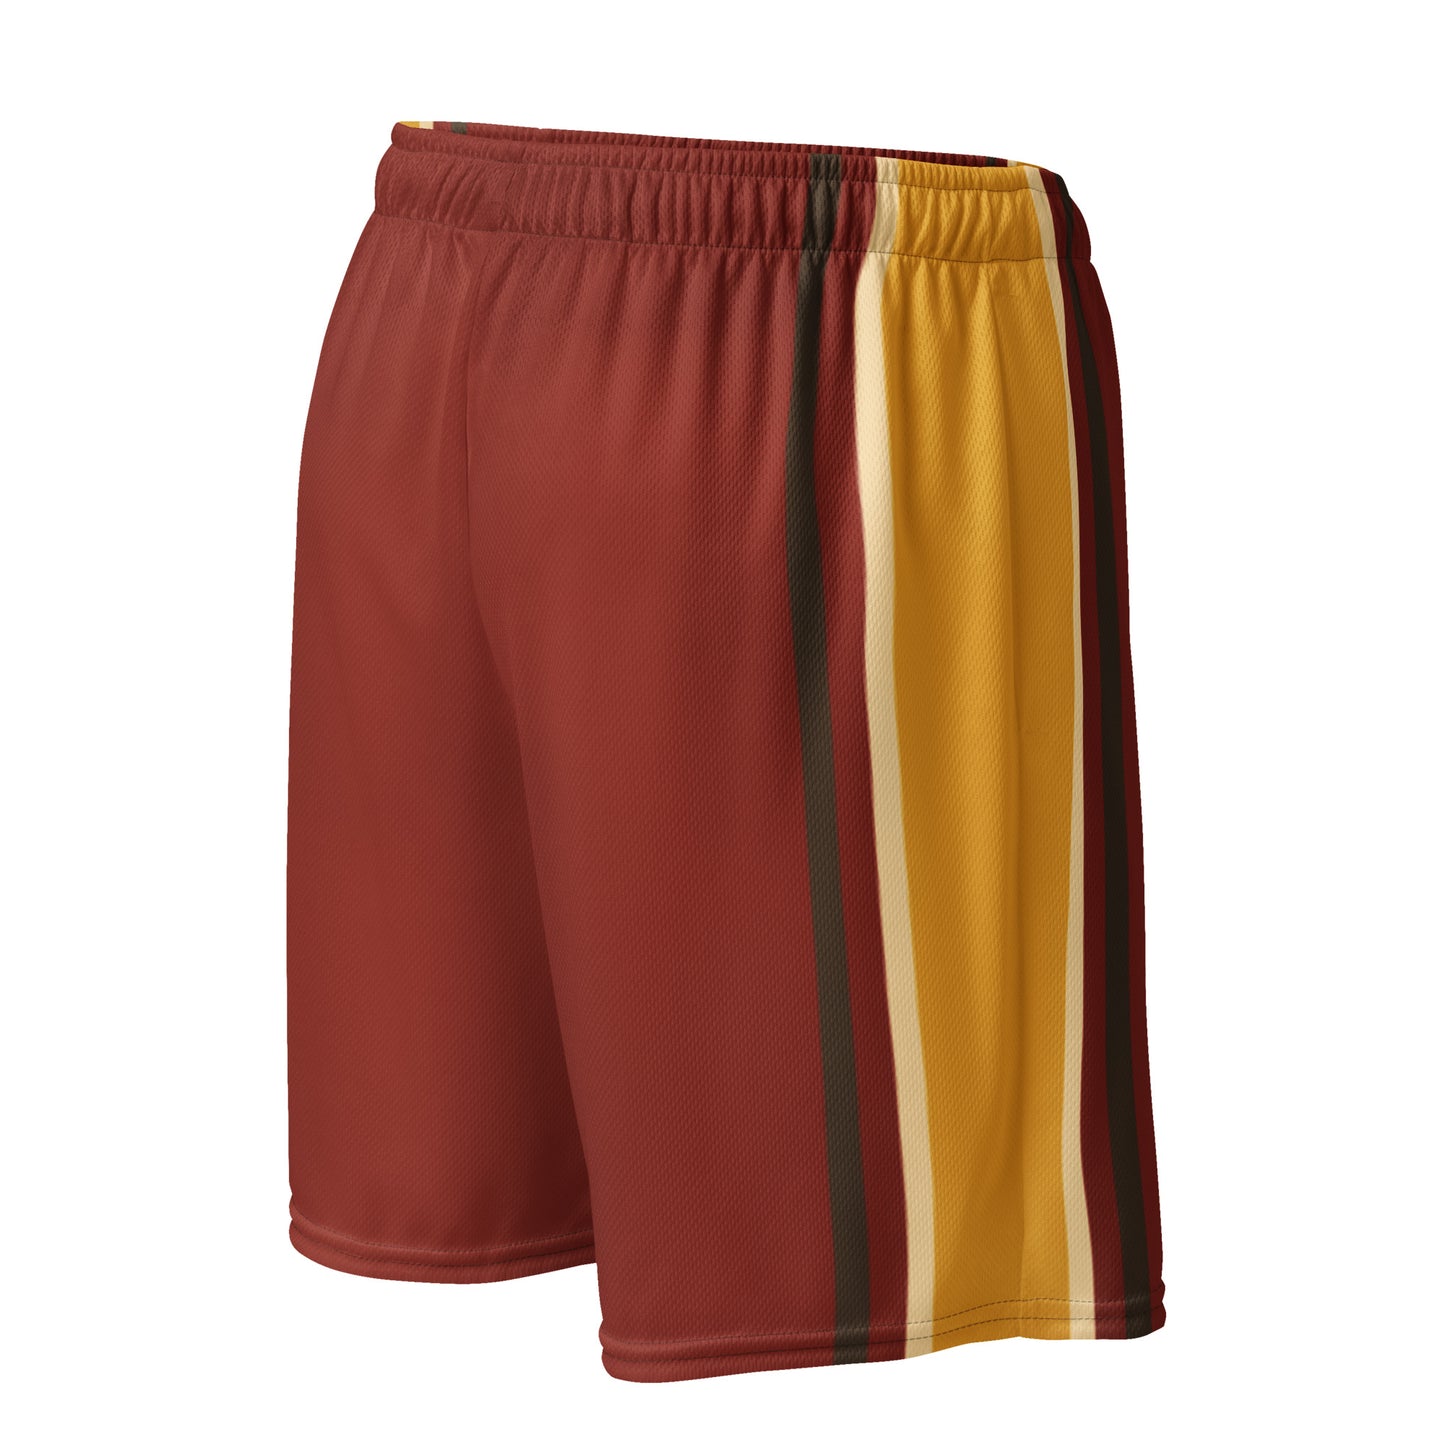 Wildfire Cigars mesh shorts in red gold brown and white